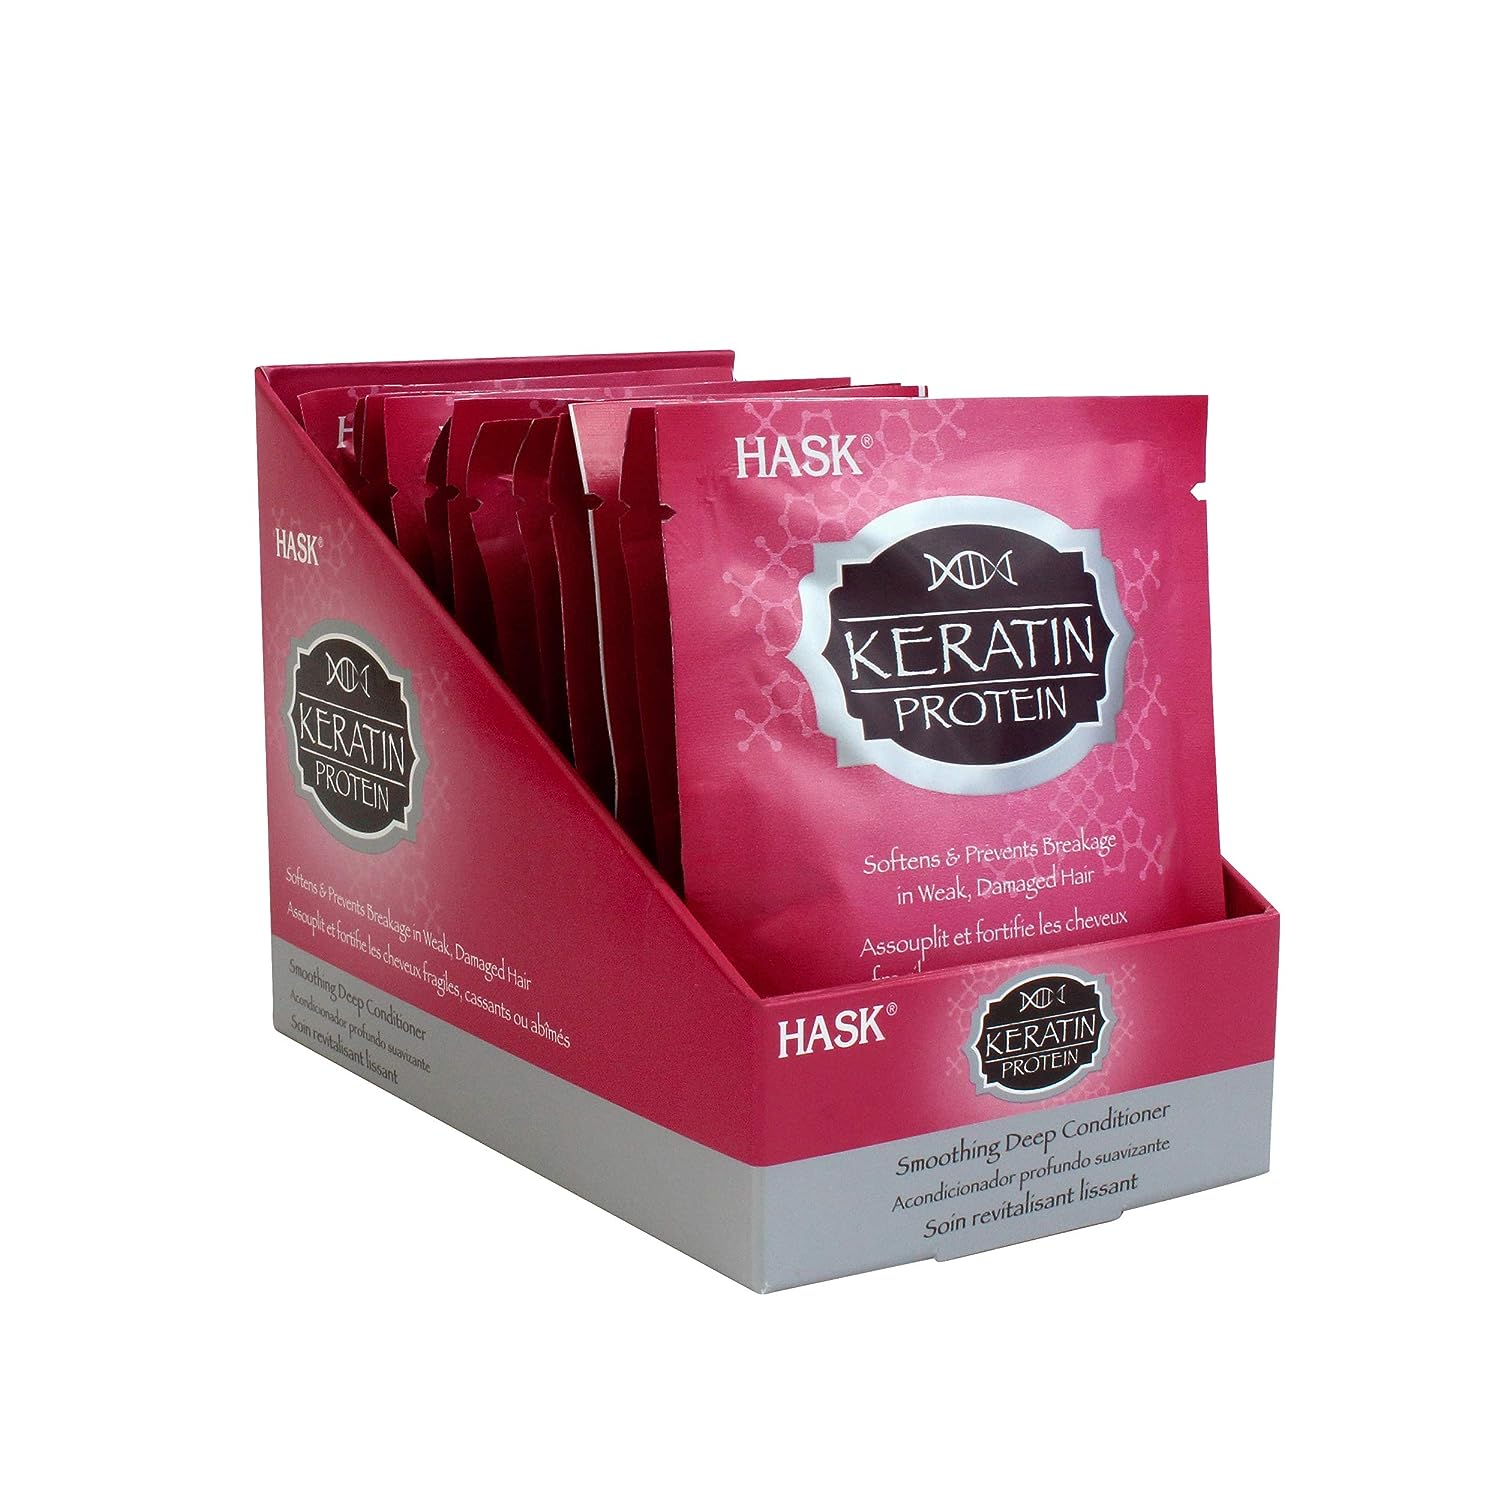 HASK KERATIN PROTEIN Smoothing Deep Conditioner [...]